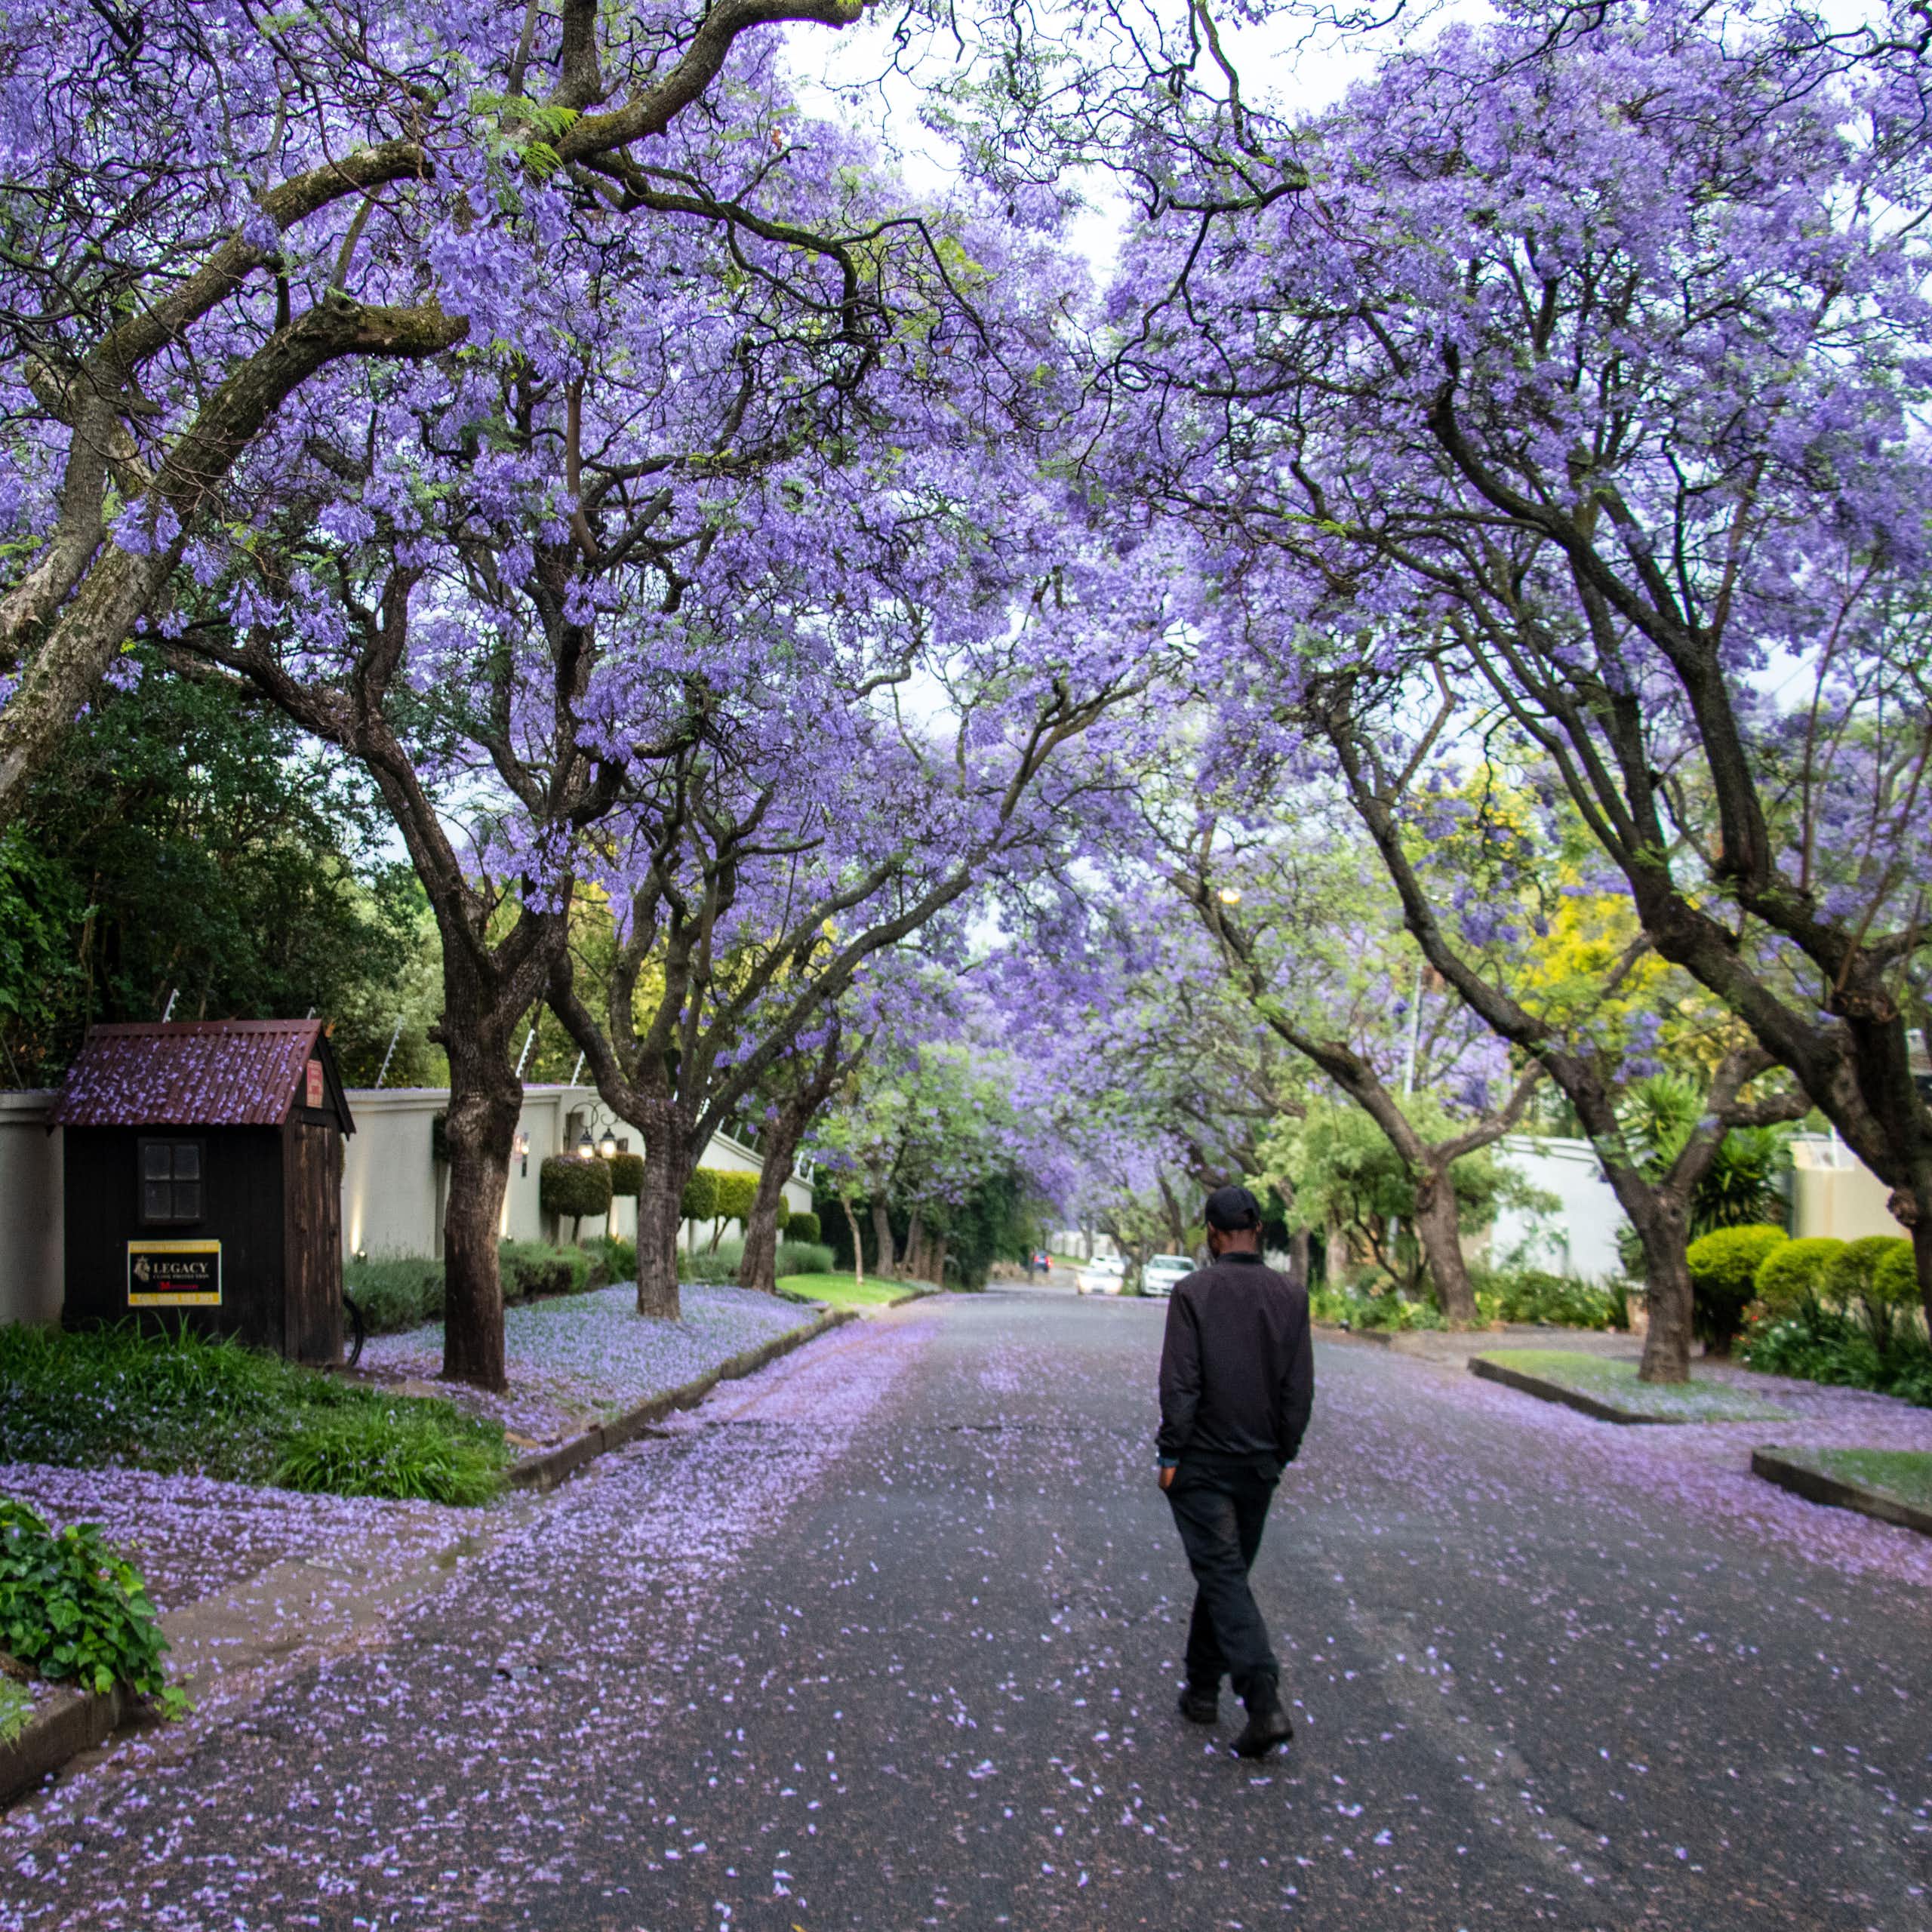 A suburban Johannesburg street, a man walks under rows of purple-flowered trees with his hands in his pockets, seen from behind